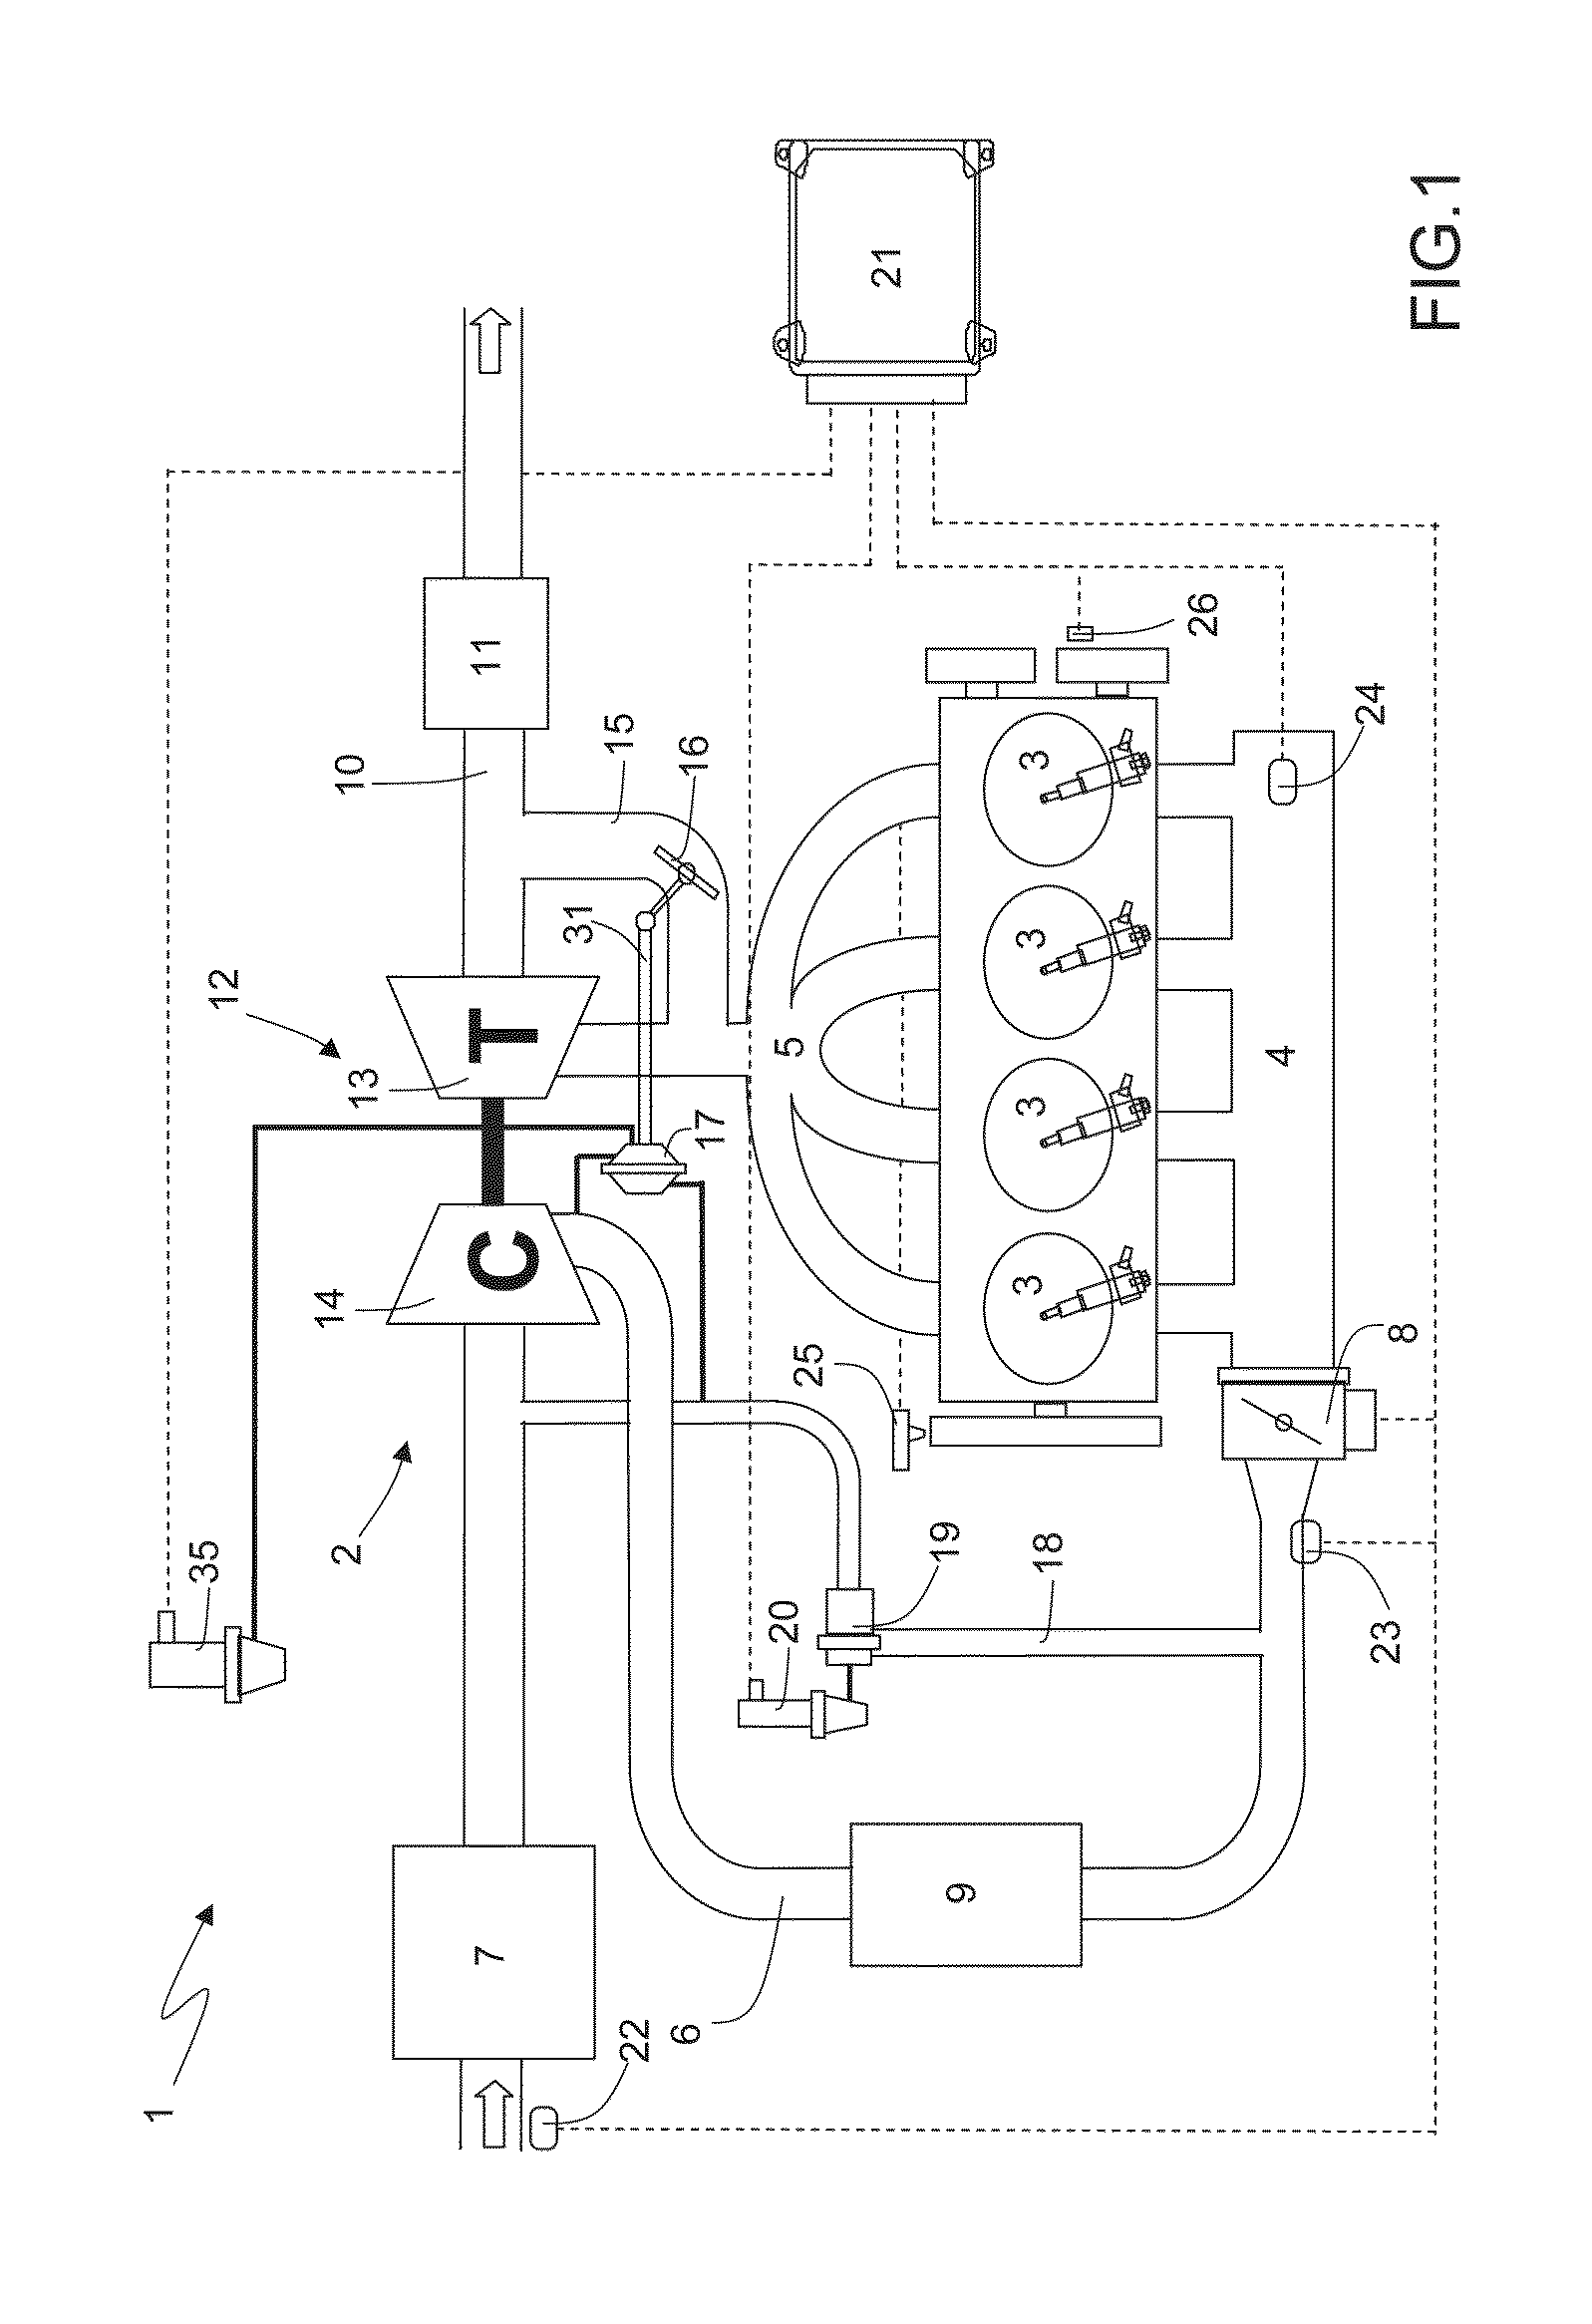 Method for the correction of the reduced mass flow rate of a compressor in an internal combustion engine turbocharged by means of a turbocharger